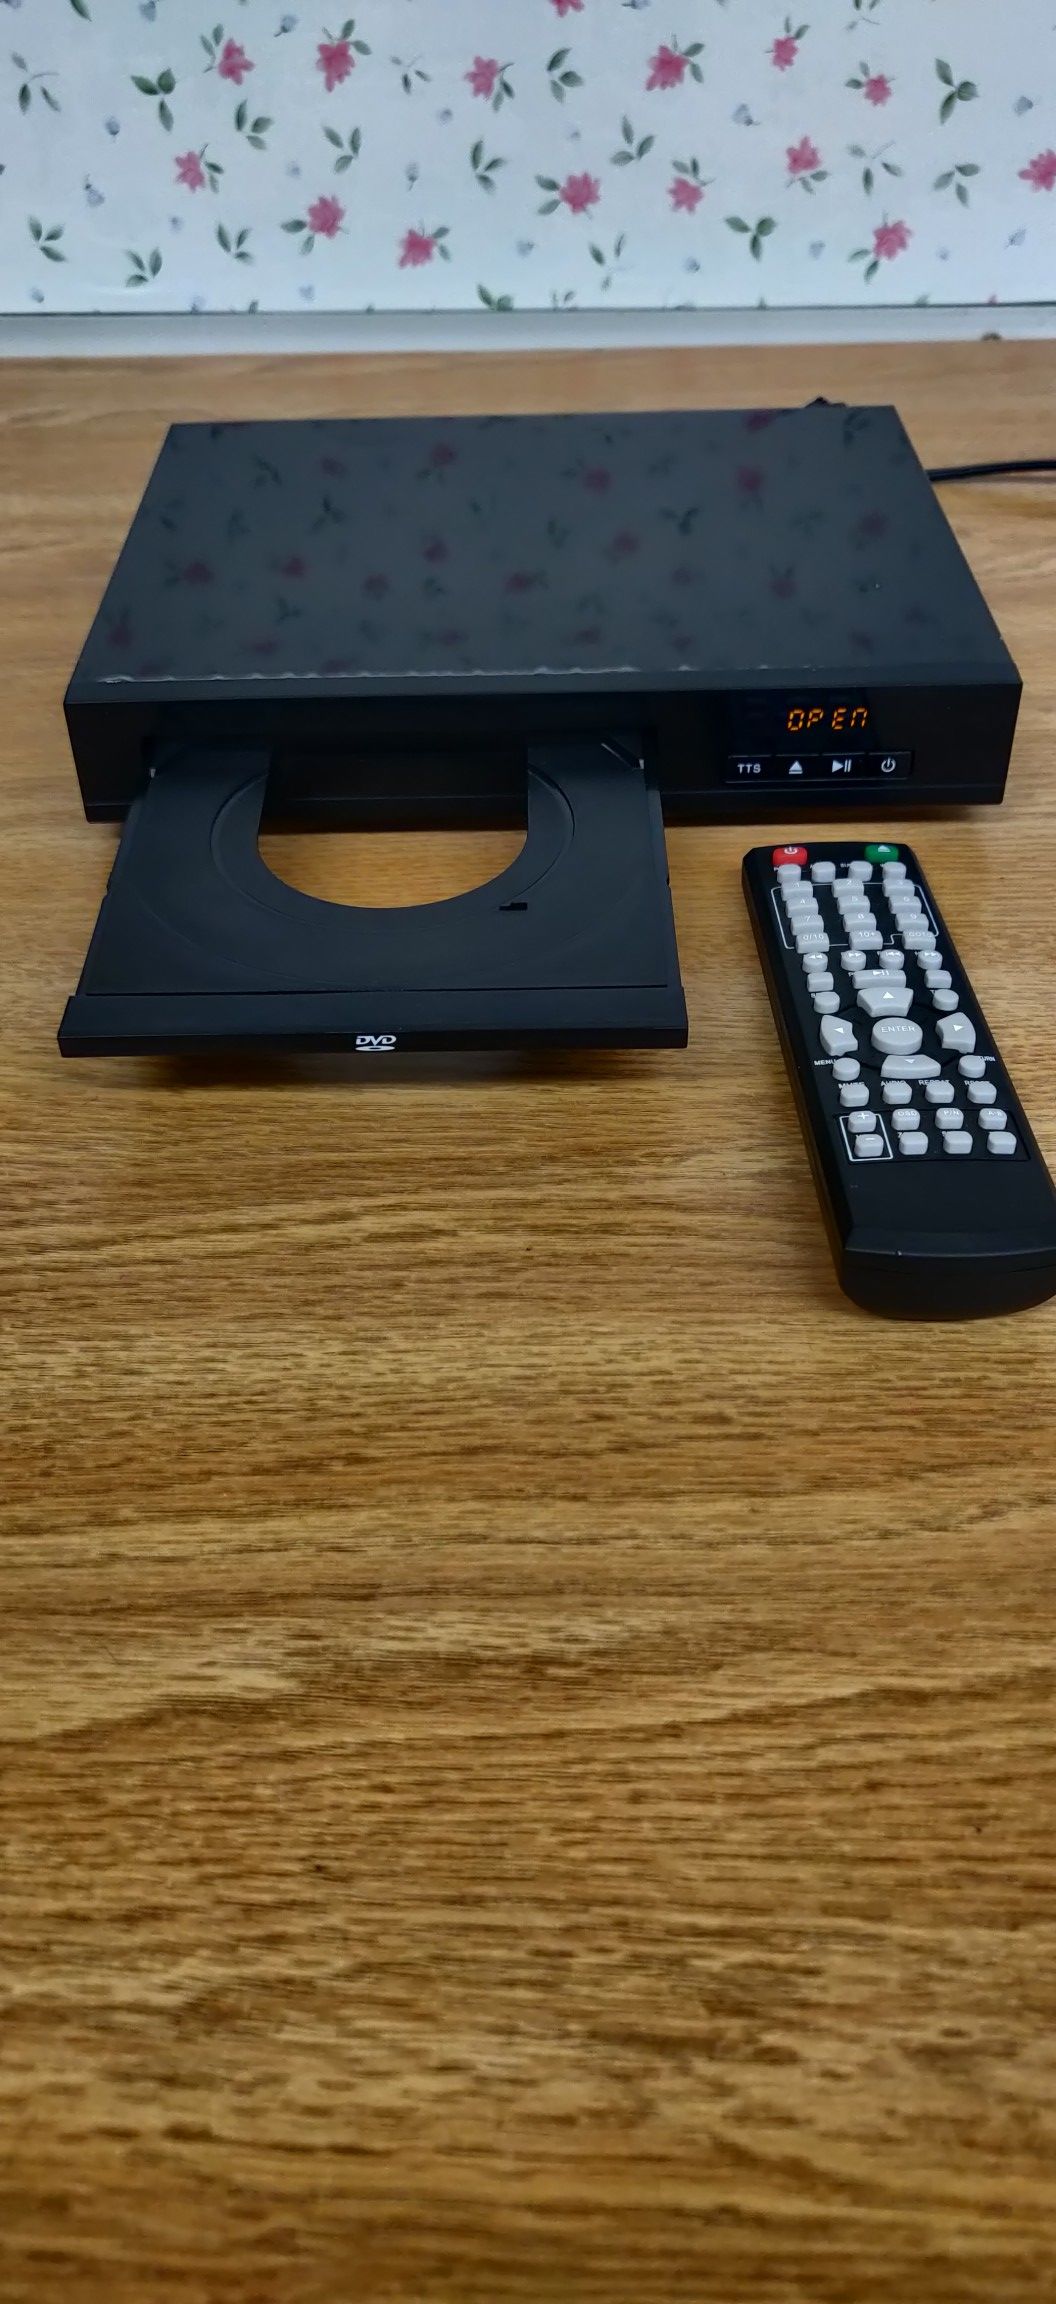 Onn DVD player with remote